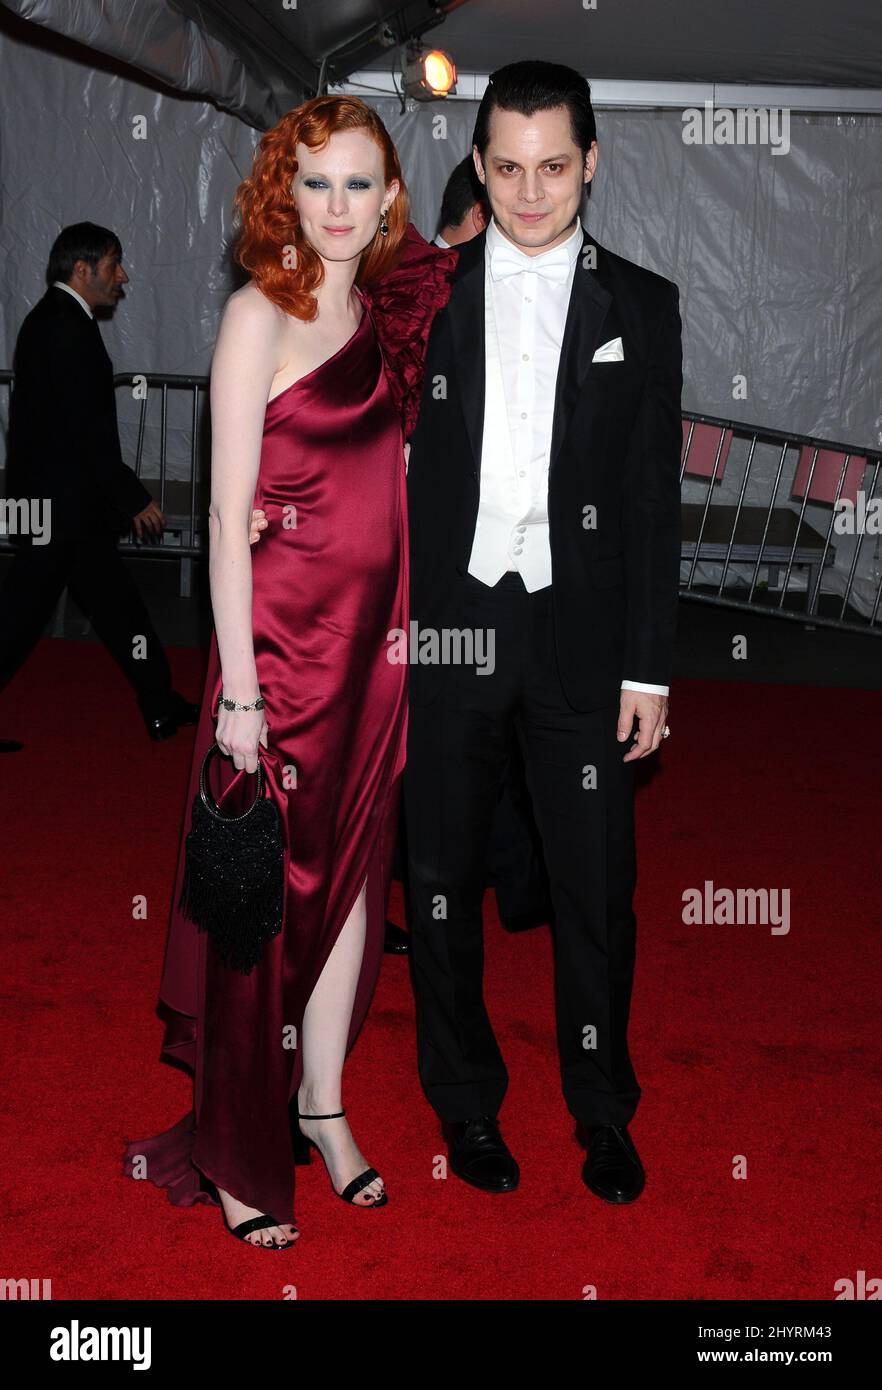 Karen Elson and Jack White arriving at the Costume Institute Gala held at the Metropolitan Museum in New York City. Stock Photo